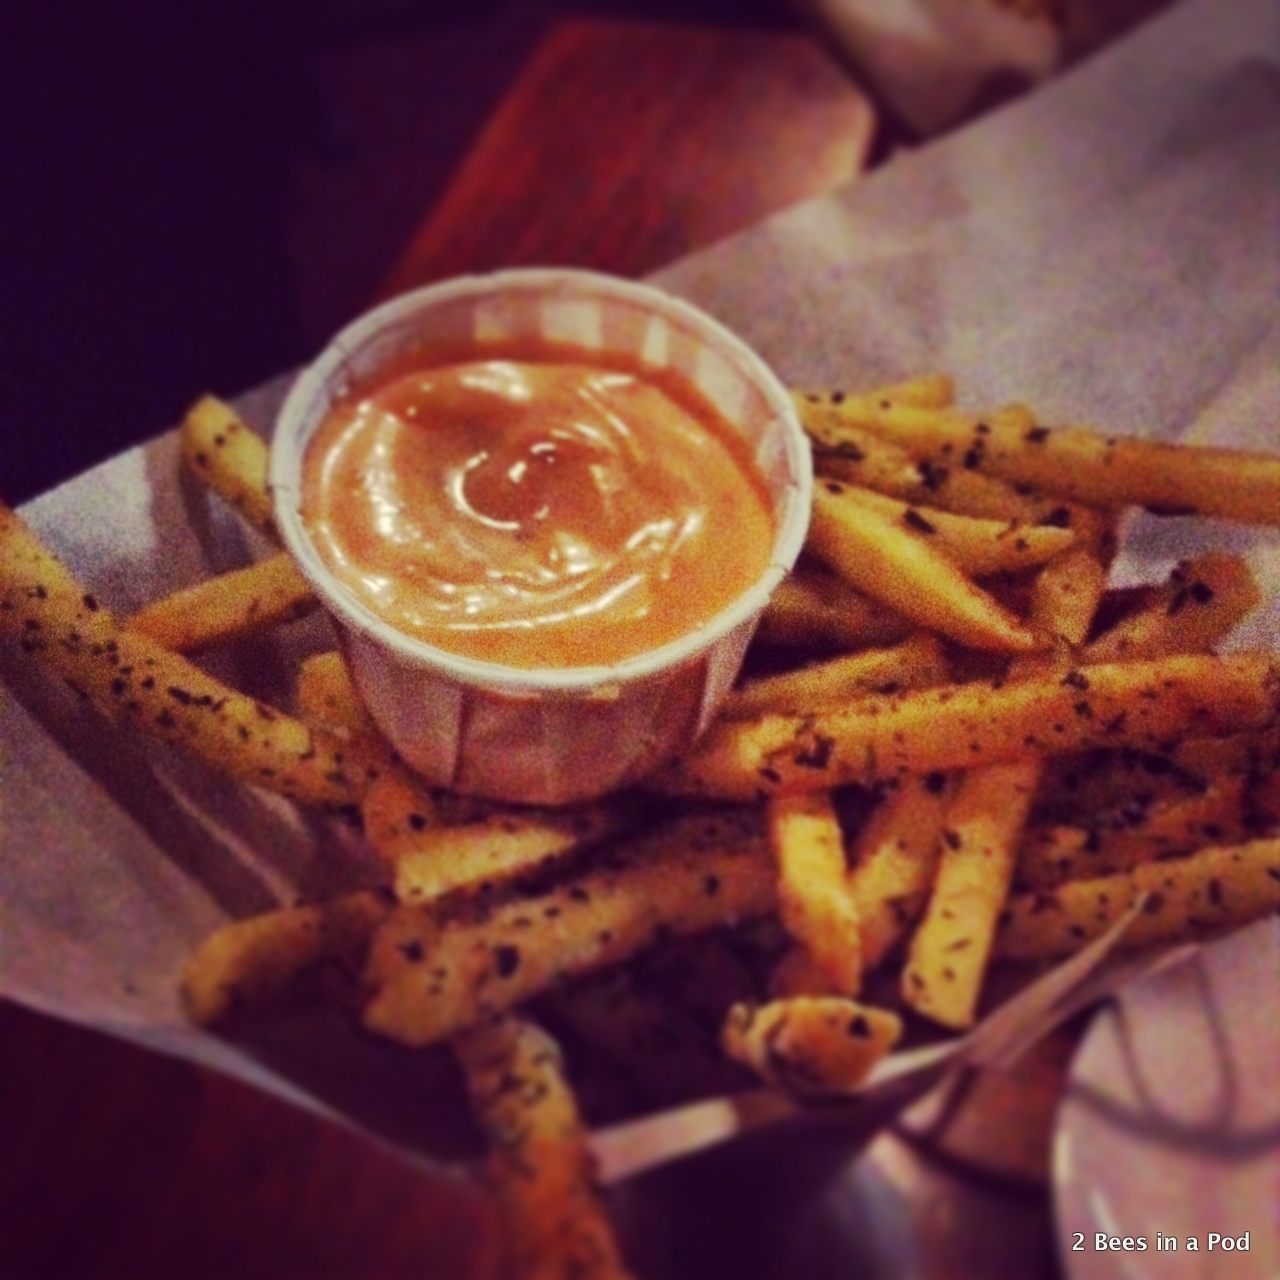 Fries and amazing dipping sauce at Bouchon's in Asheville